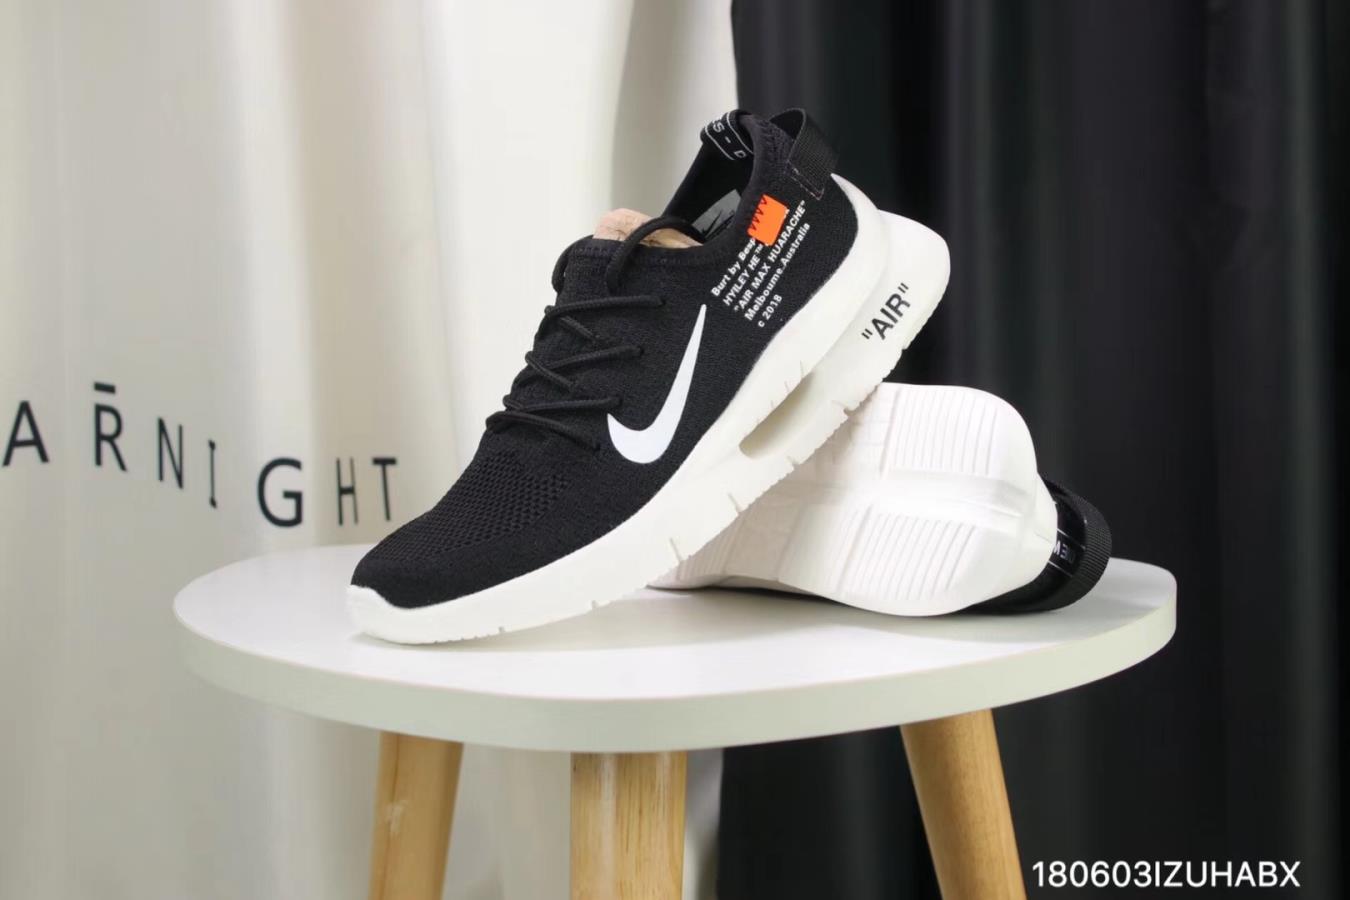 Off-white the Nike Air Max 87 OG Flyknit Black White Shoes